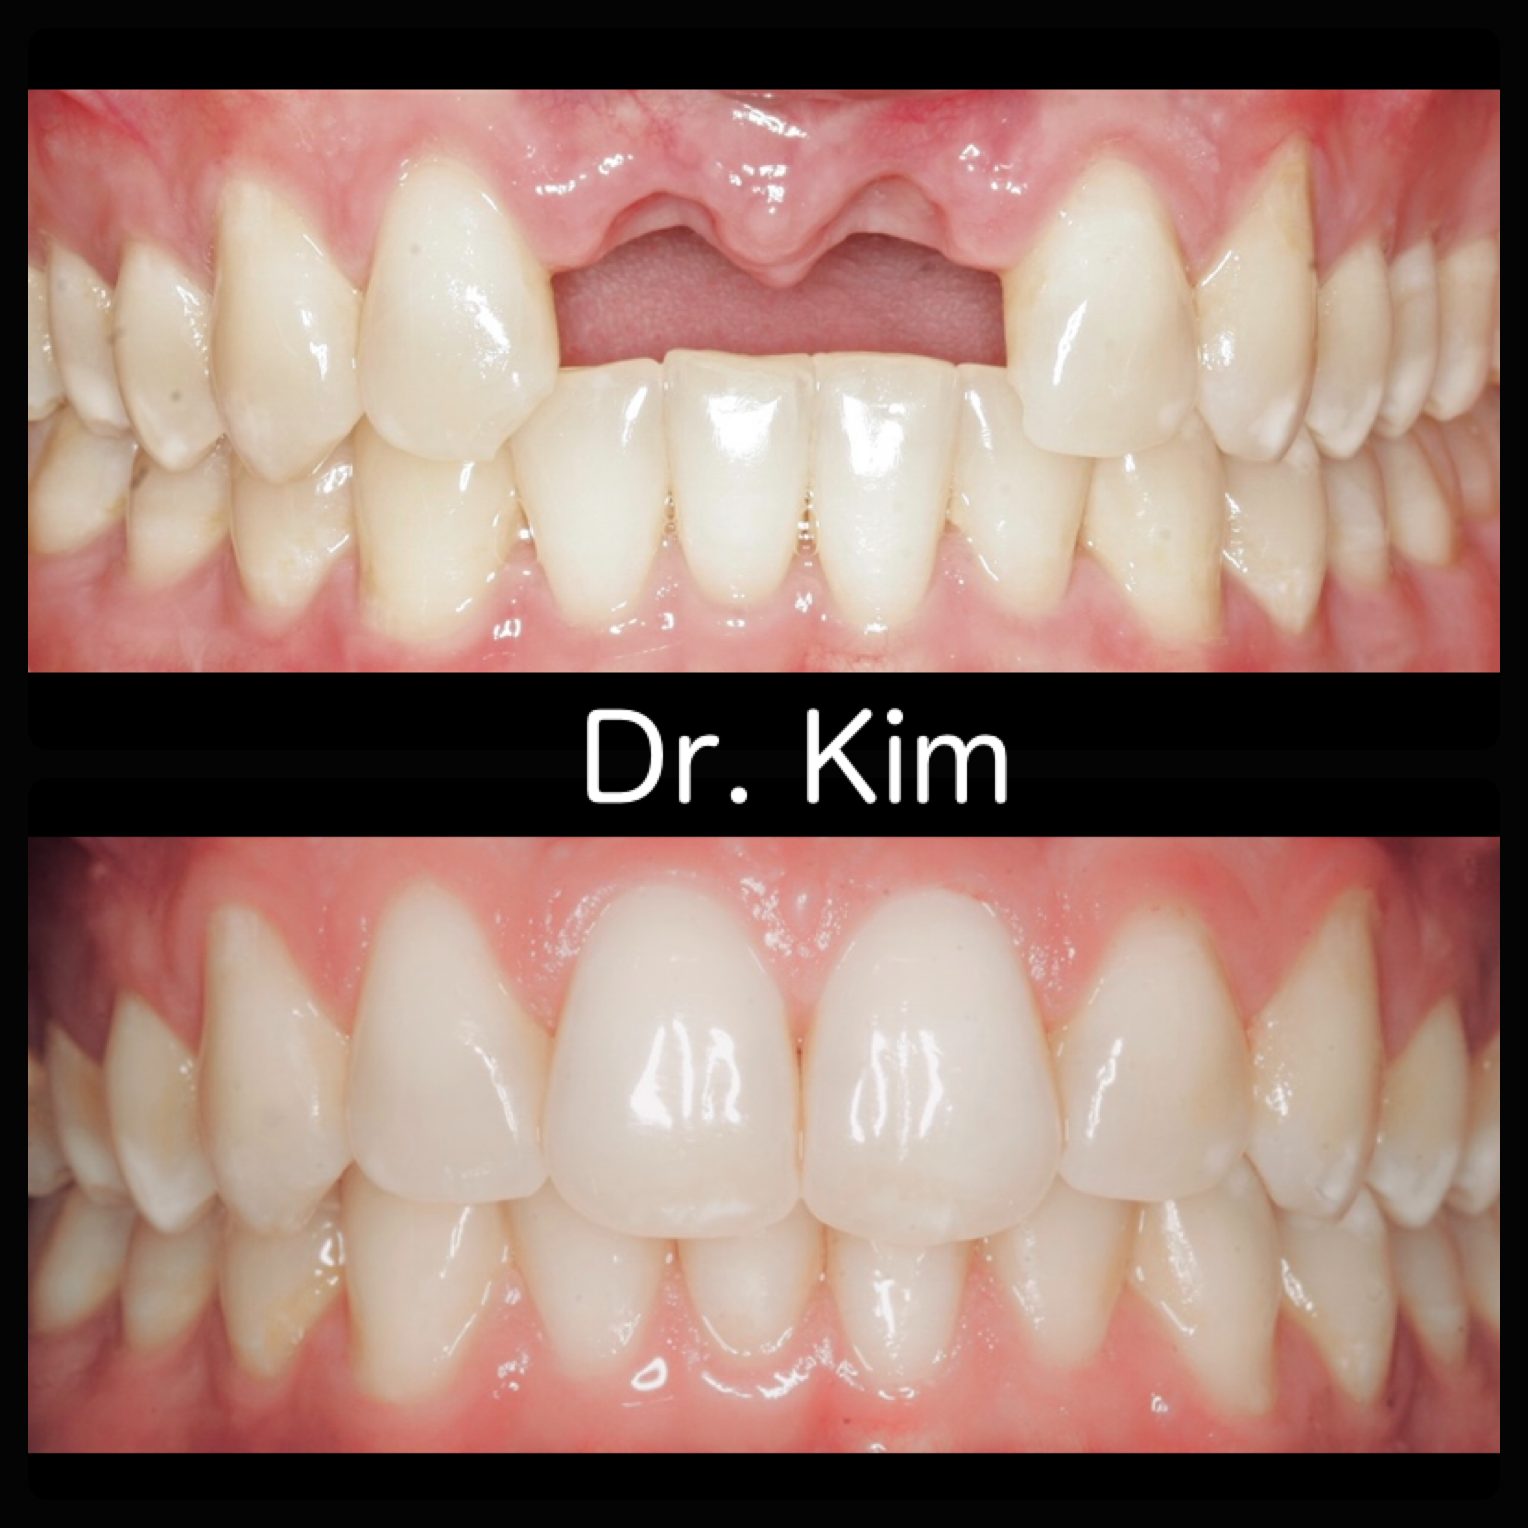 Two dental implants and crowns due to traumatic tooth loss